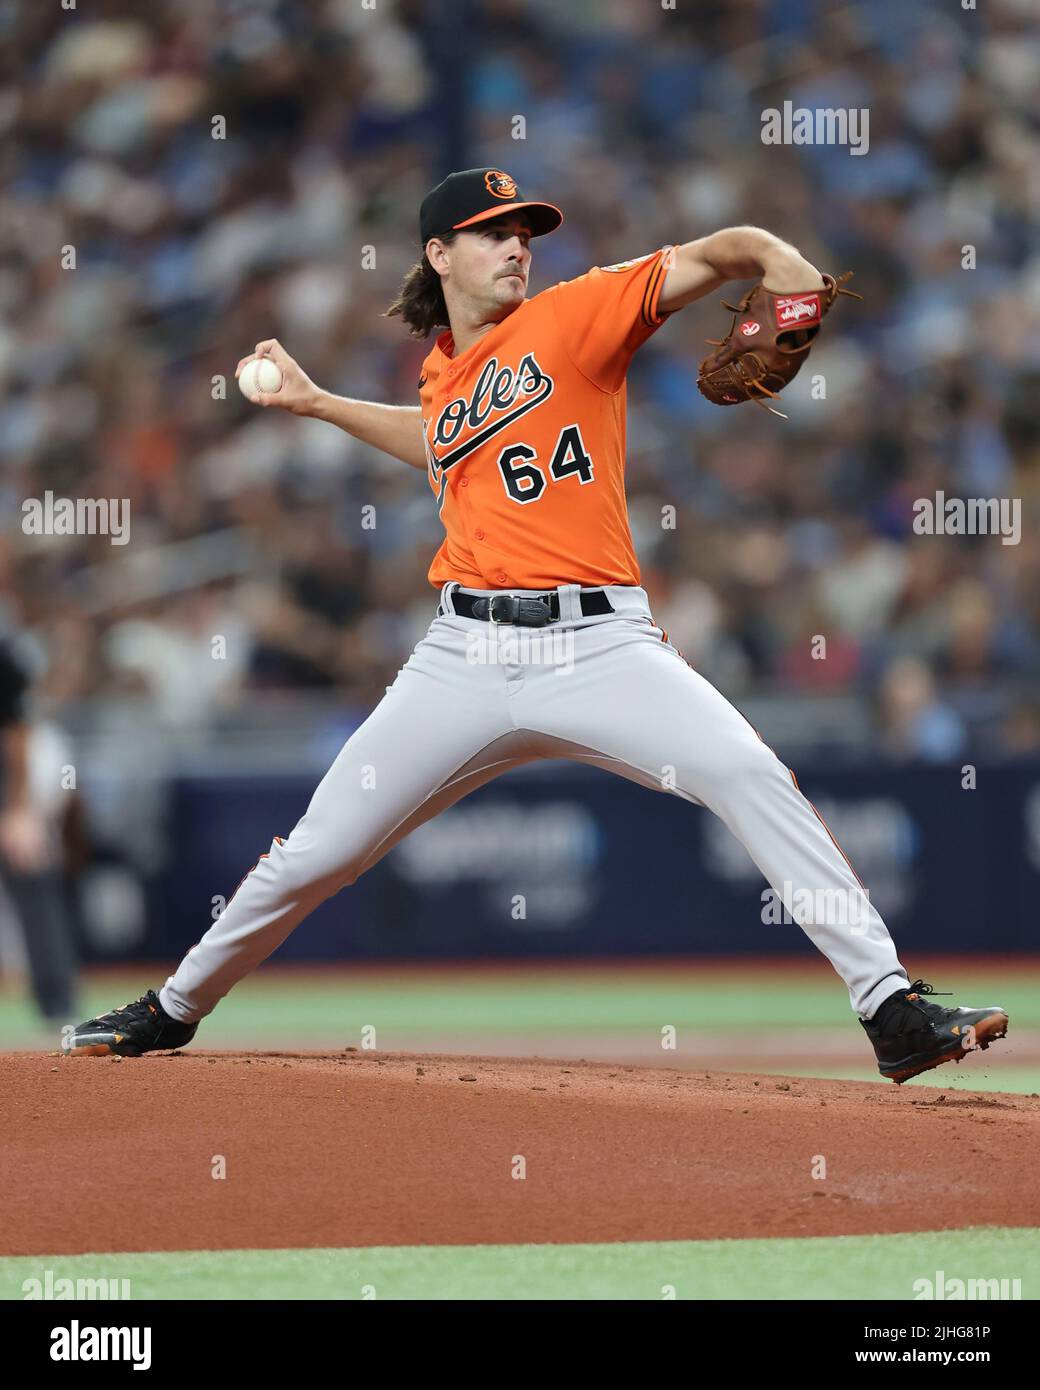 St. Petersburg, United States. 16th July, 2022. St. Petersburg, FL. USA;  Baltimore Orioles starting pitcher Dean Kremer (64) delivers a pitch during  a major league baseball game against the Tampa Bay Rays